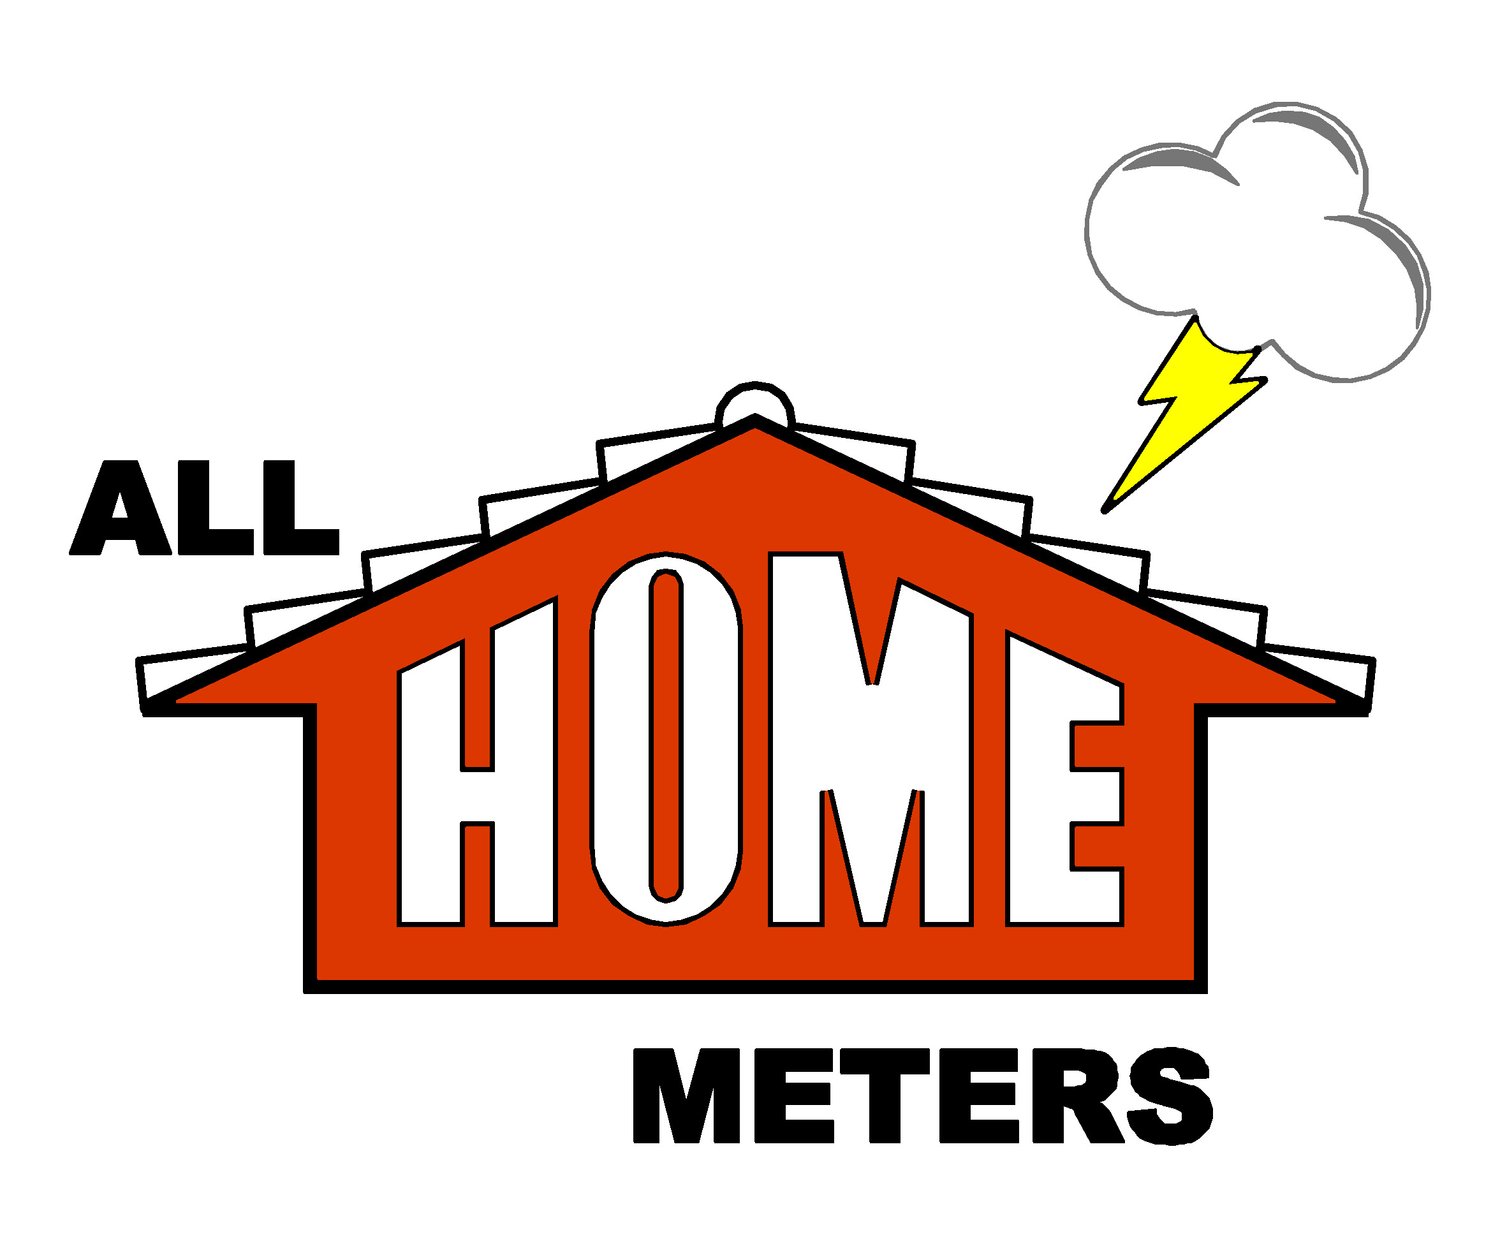 ALL HOME METERS